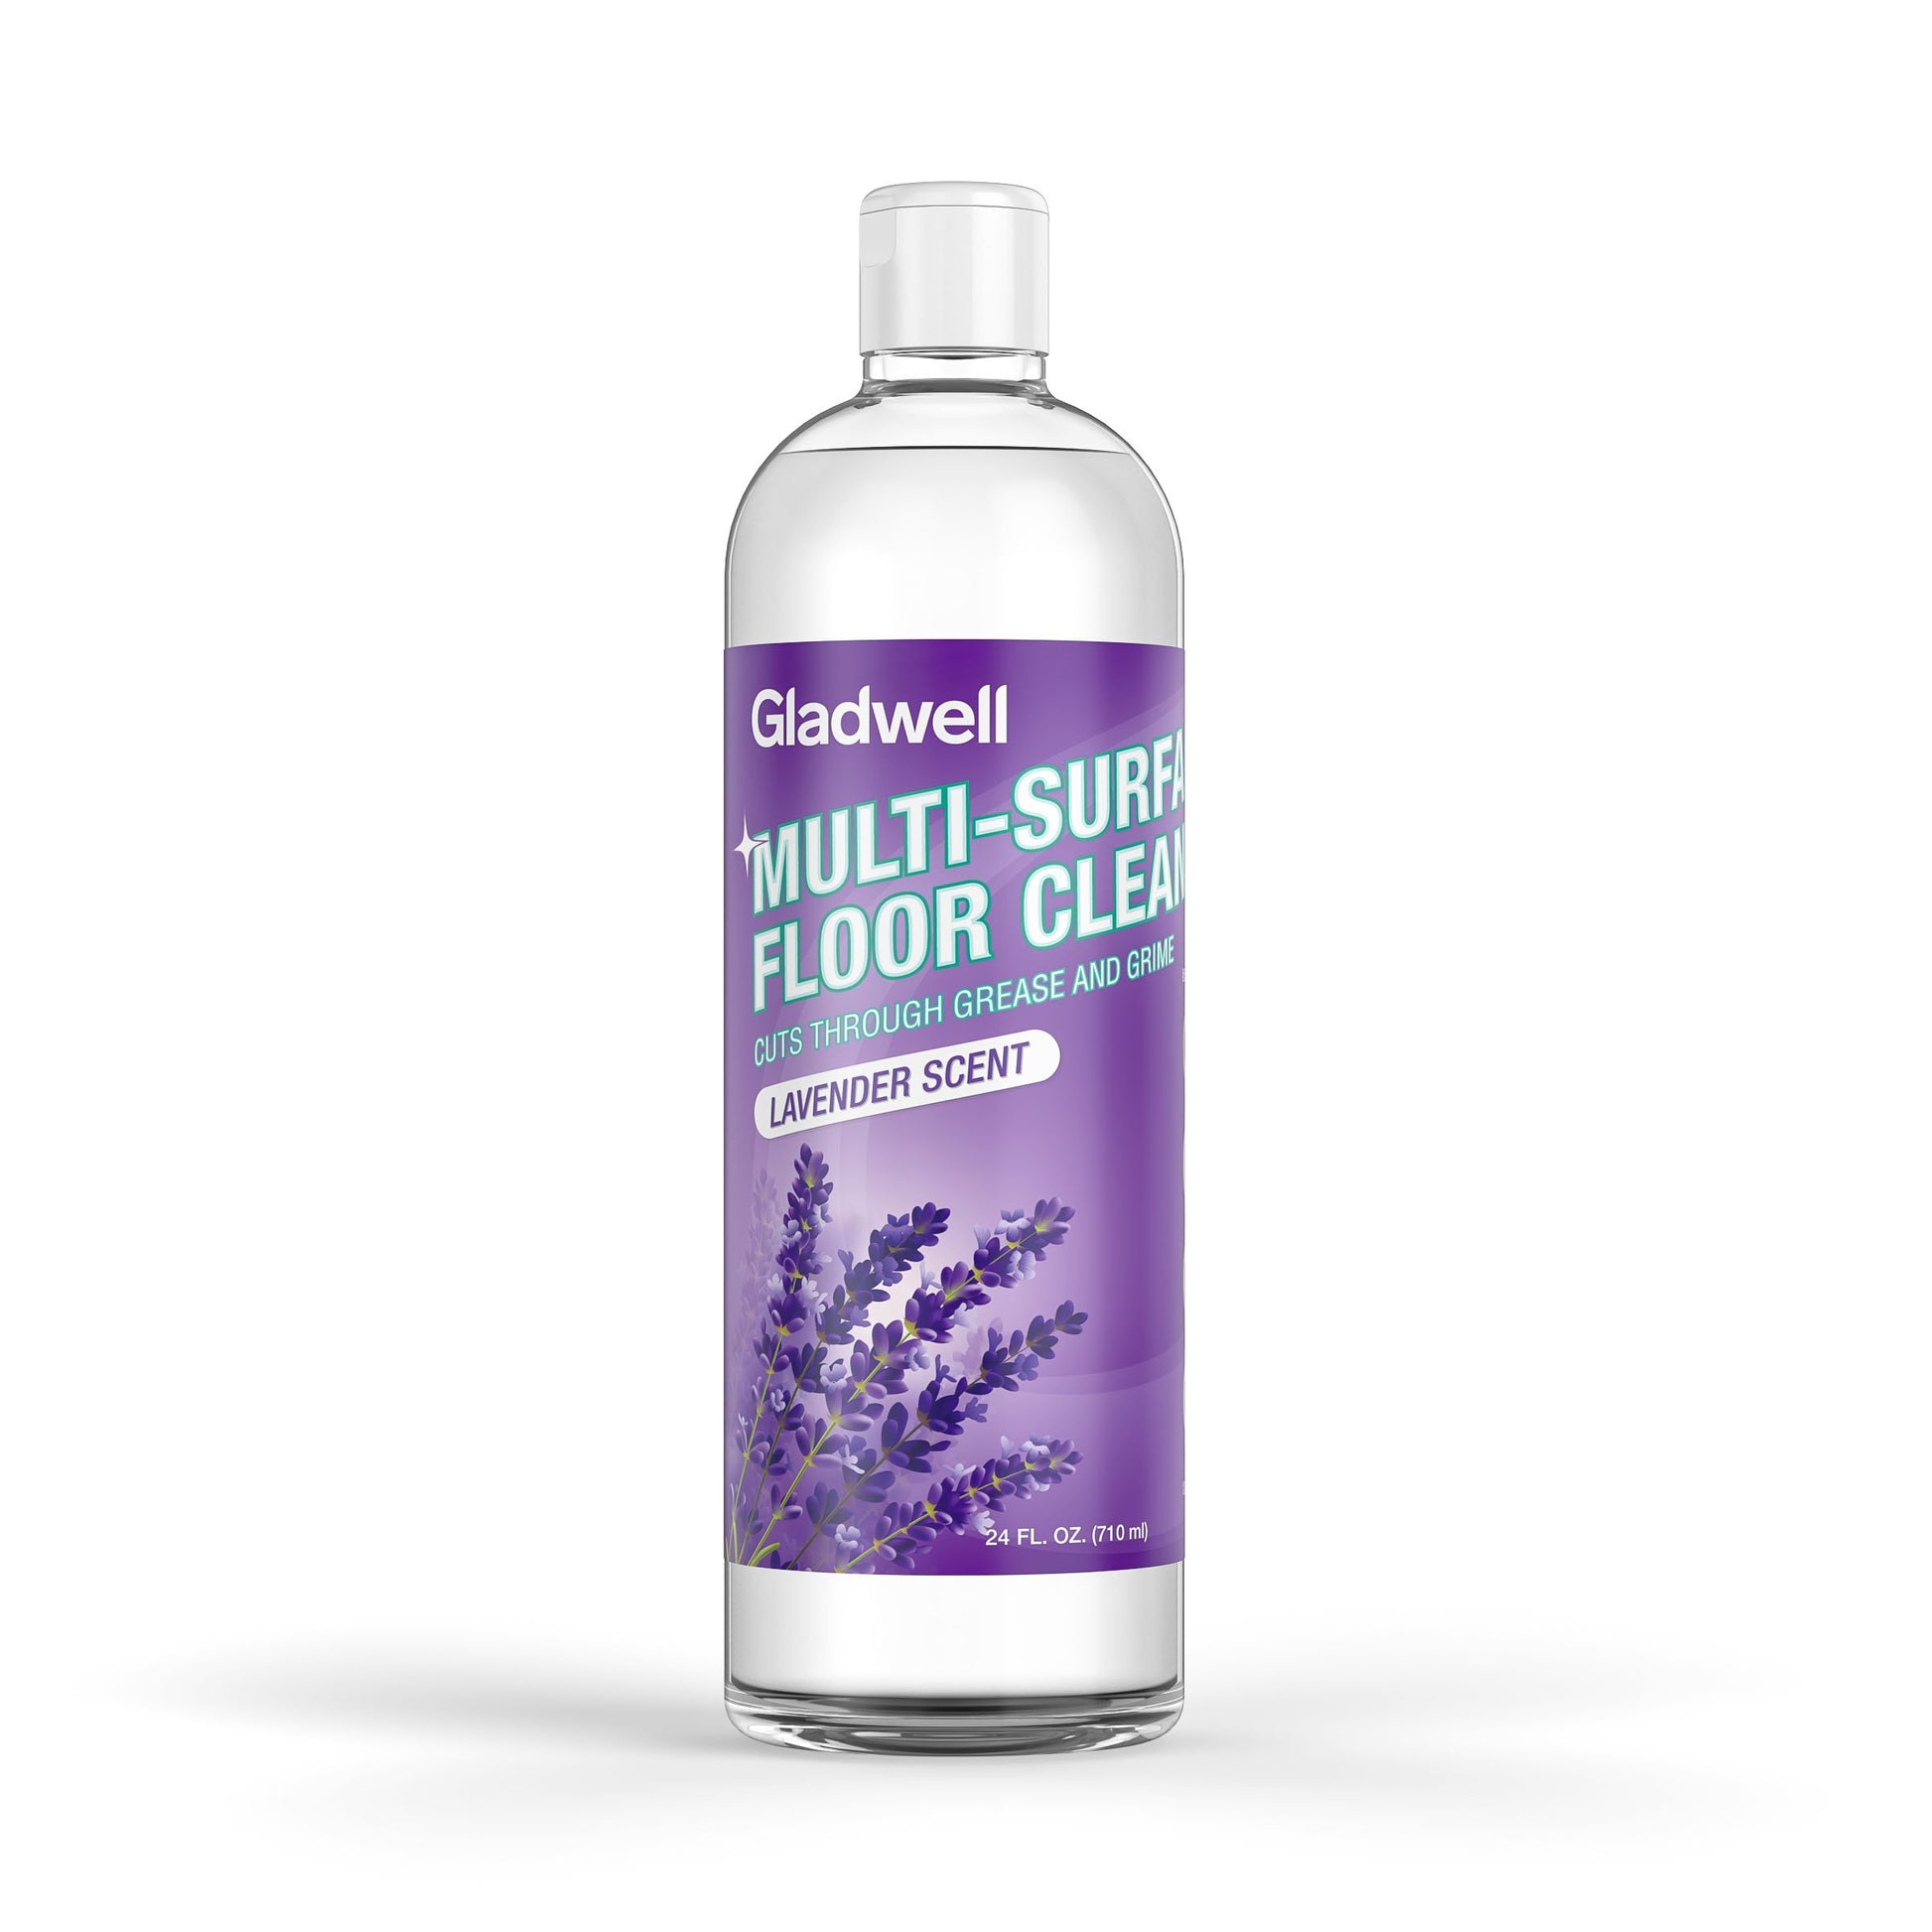 Gladwell Multi Surface Floor Cleaner Disinfectant Detergent and Cleaning Solution - Lavender